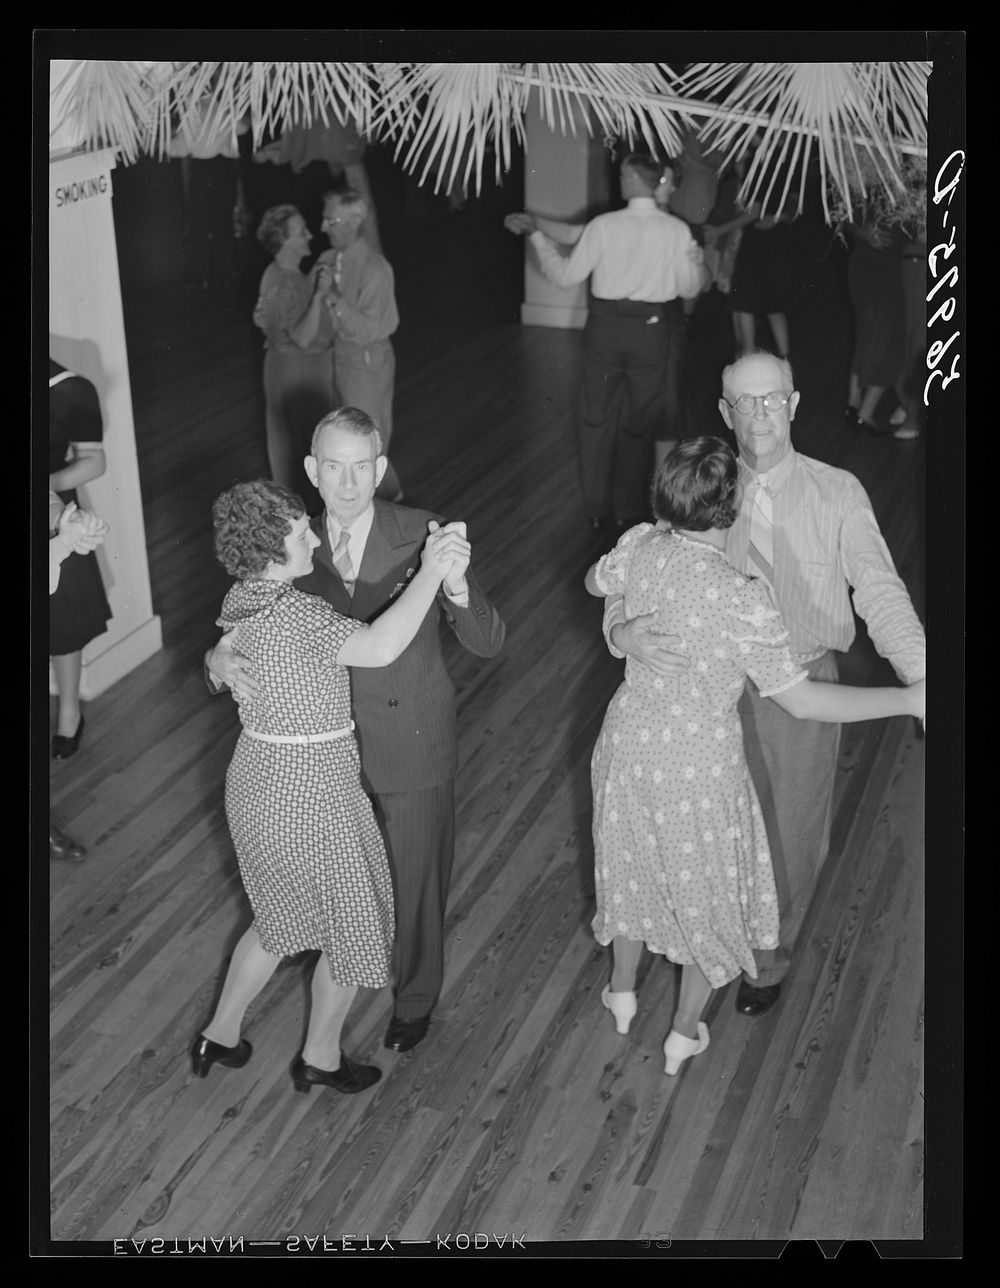 [Untitled photo, possibly related to: Dances are held regularly at Sarasota trailer park. Sarasota, Florida]. Sourced from…